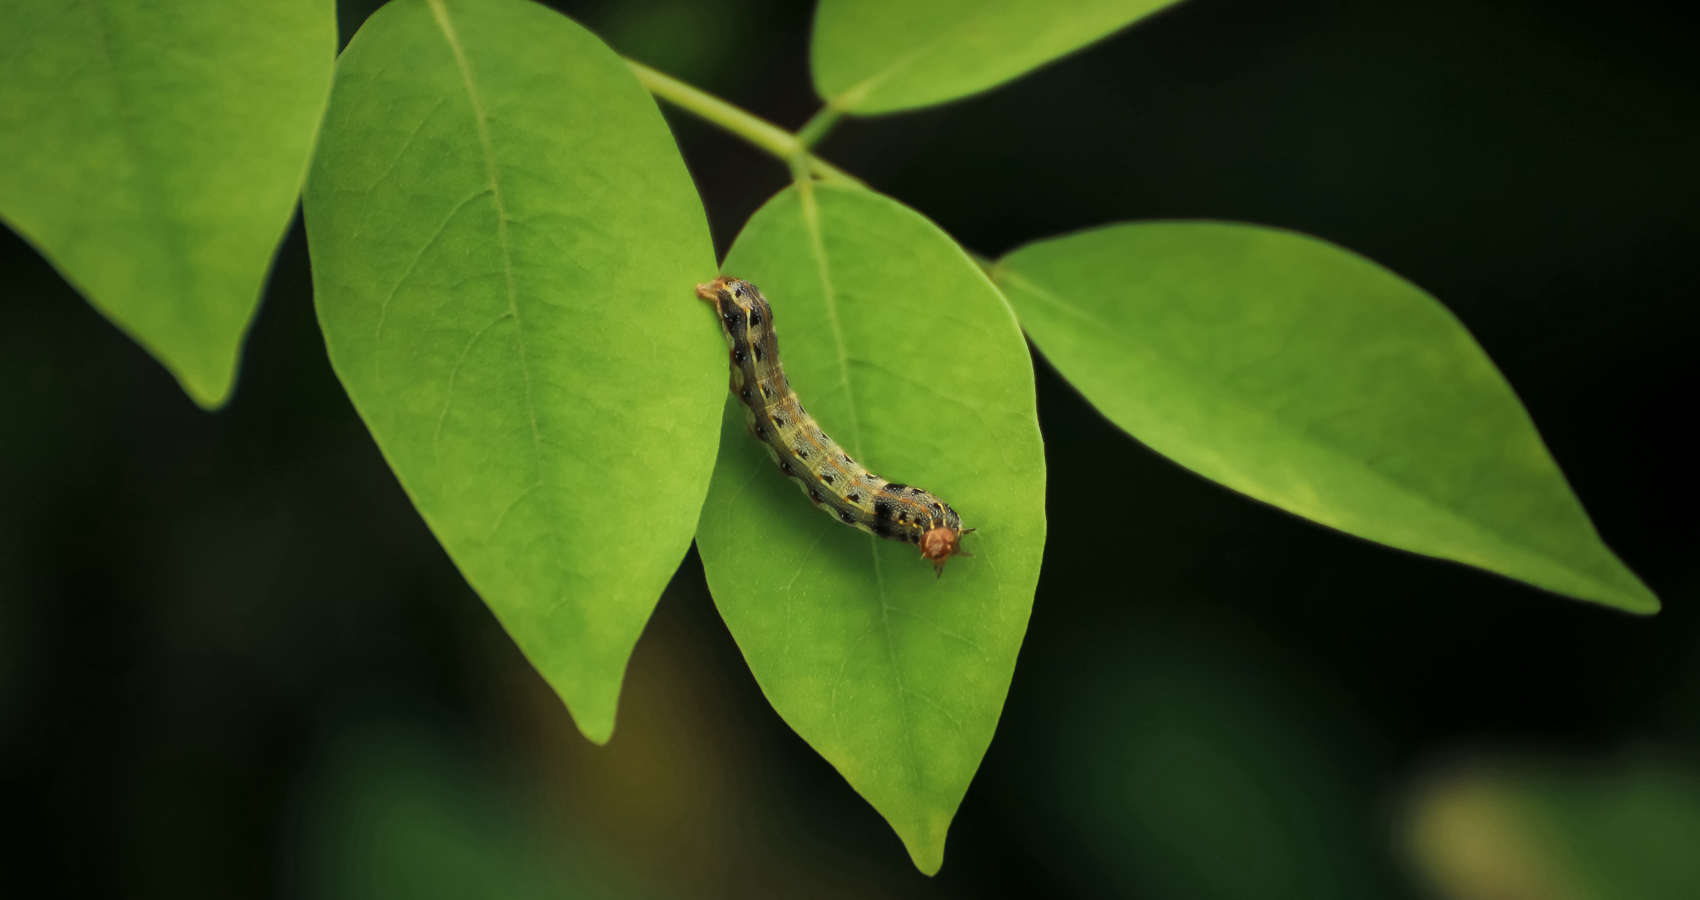 A Caterpillar's Wisdom, a poem by Olivia Todd at Spillwords.com